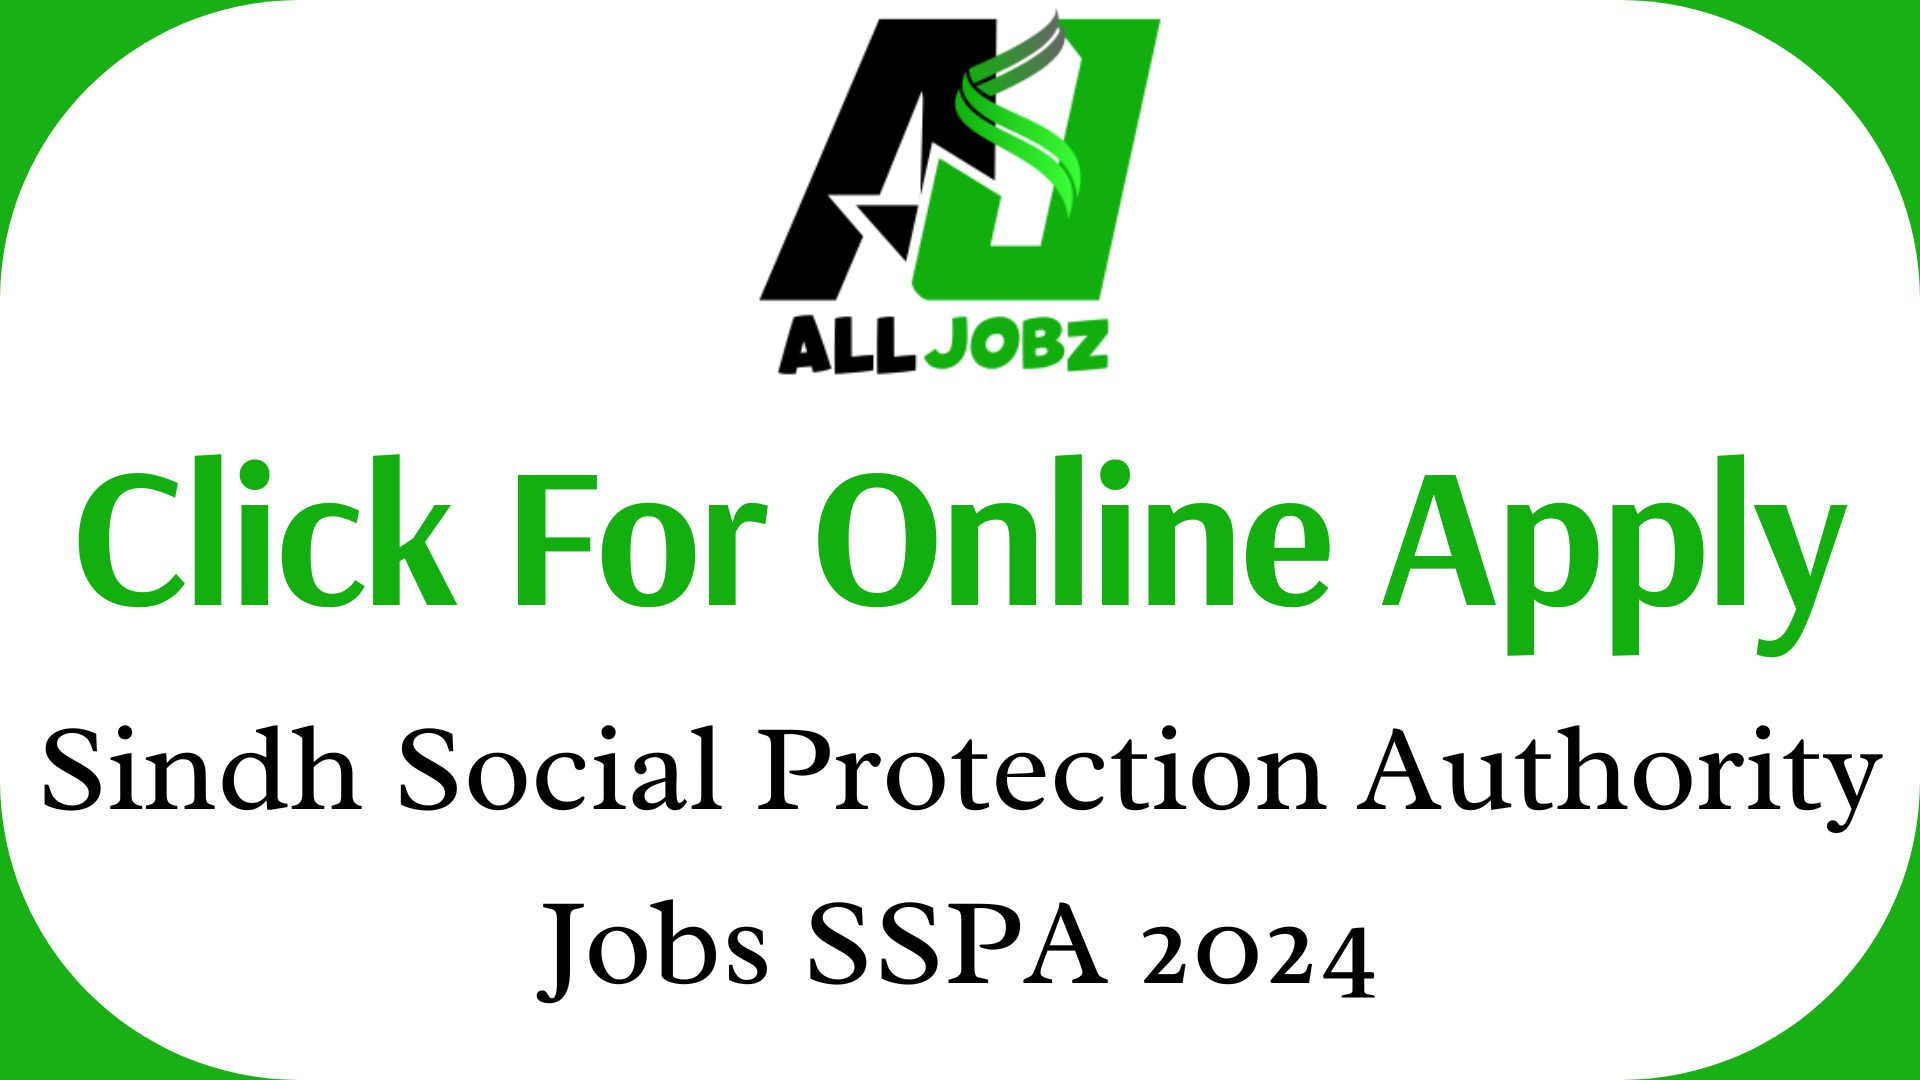 Sindh Social Protection Authority Jobs Sspa 2024 Online Apply, Sindh Social Protection Authority Sspa 2024 Jobs Online Apply Pakistan, Jobs In Sindh Social Protection Authority, Spsu.gos.pk Jobs, Social Protection Authority Jobs, Sindh Social Welfare Department, Health And Nutrition Cct Spsu, Check Eligibility Sindh, Www Spsu Gos Pk Application Form, Jobz.pk, Alljobz.pk Pakistan, Jobs.pk, Jobalert.net, And Newz.com.pk